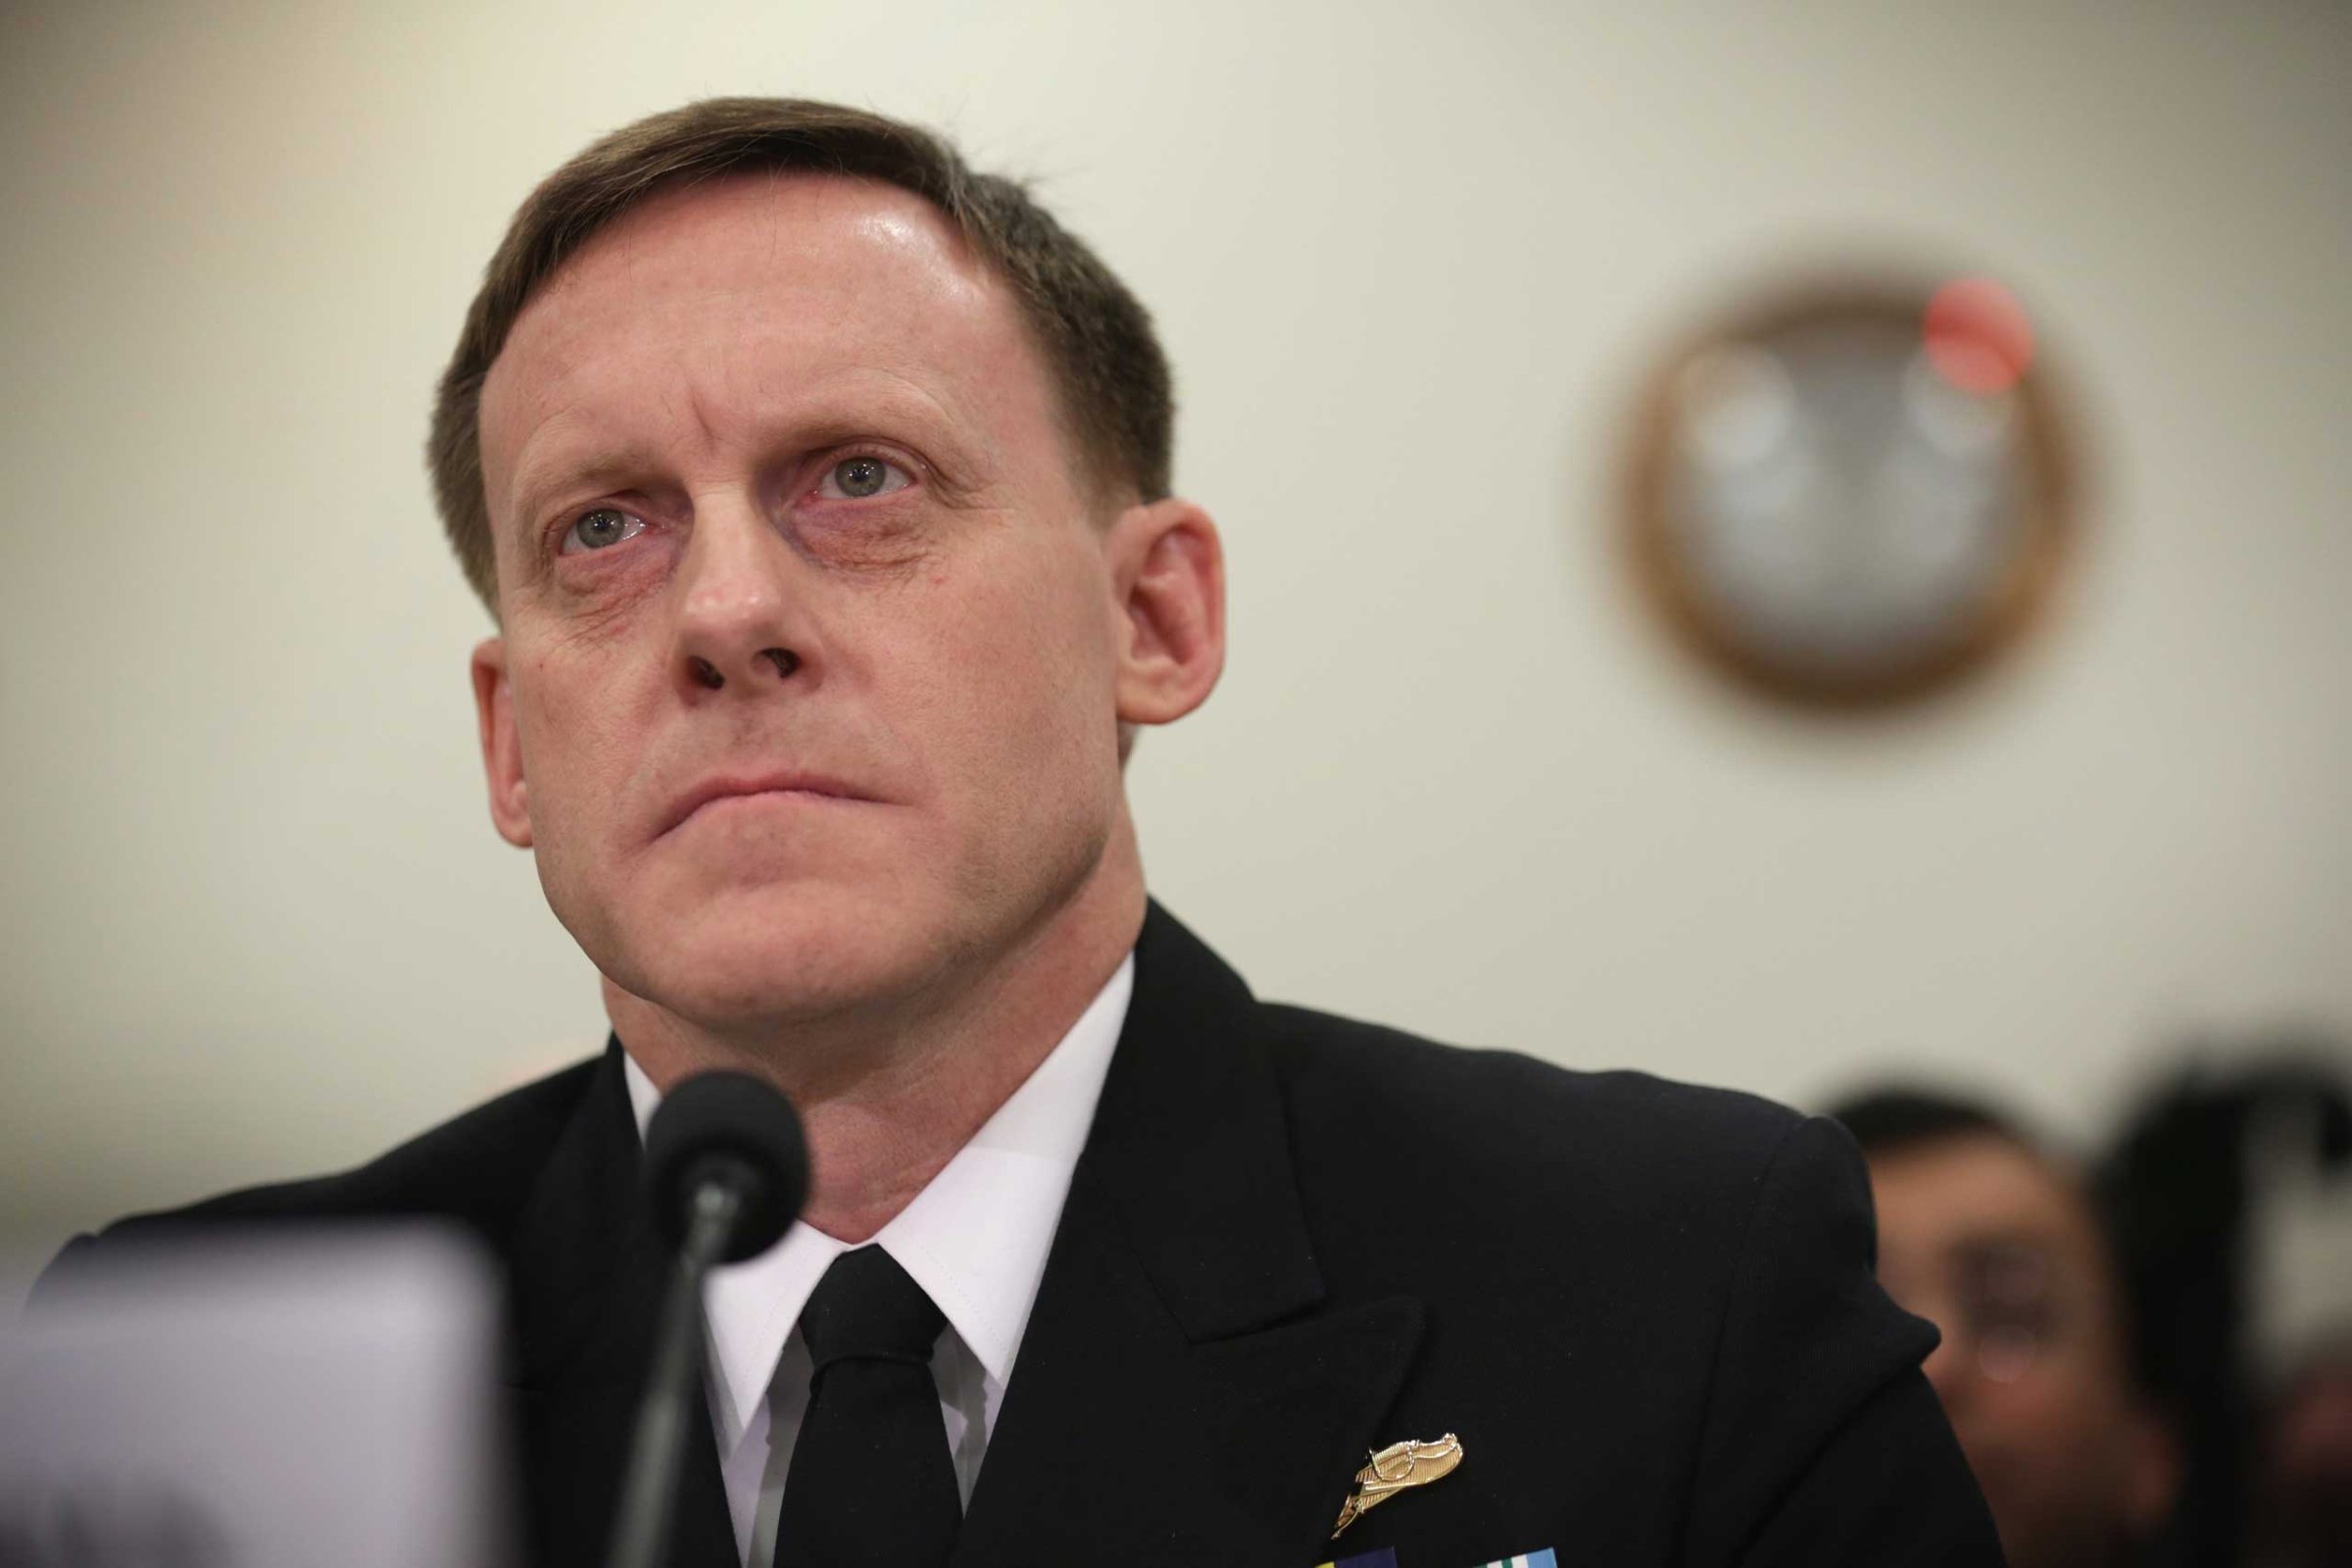 Adm. Michael Rogers, commander of the U.S. Cyber Command and director of the National Security Agency, testifies during a hearing before the House (Select) Intelligence Committee Nov. 20, 2014 on Capitol Hill in Washington, DC.